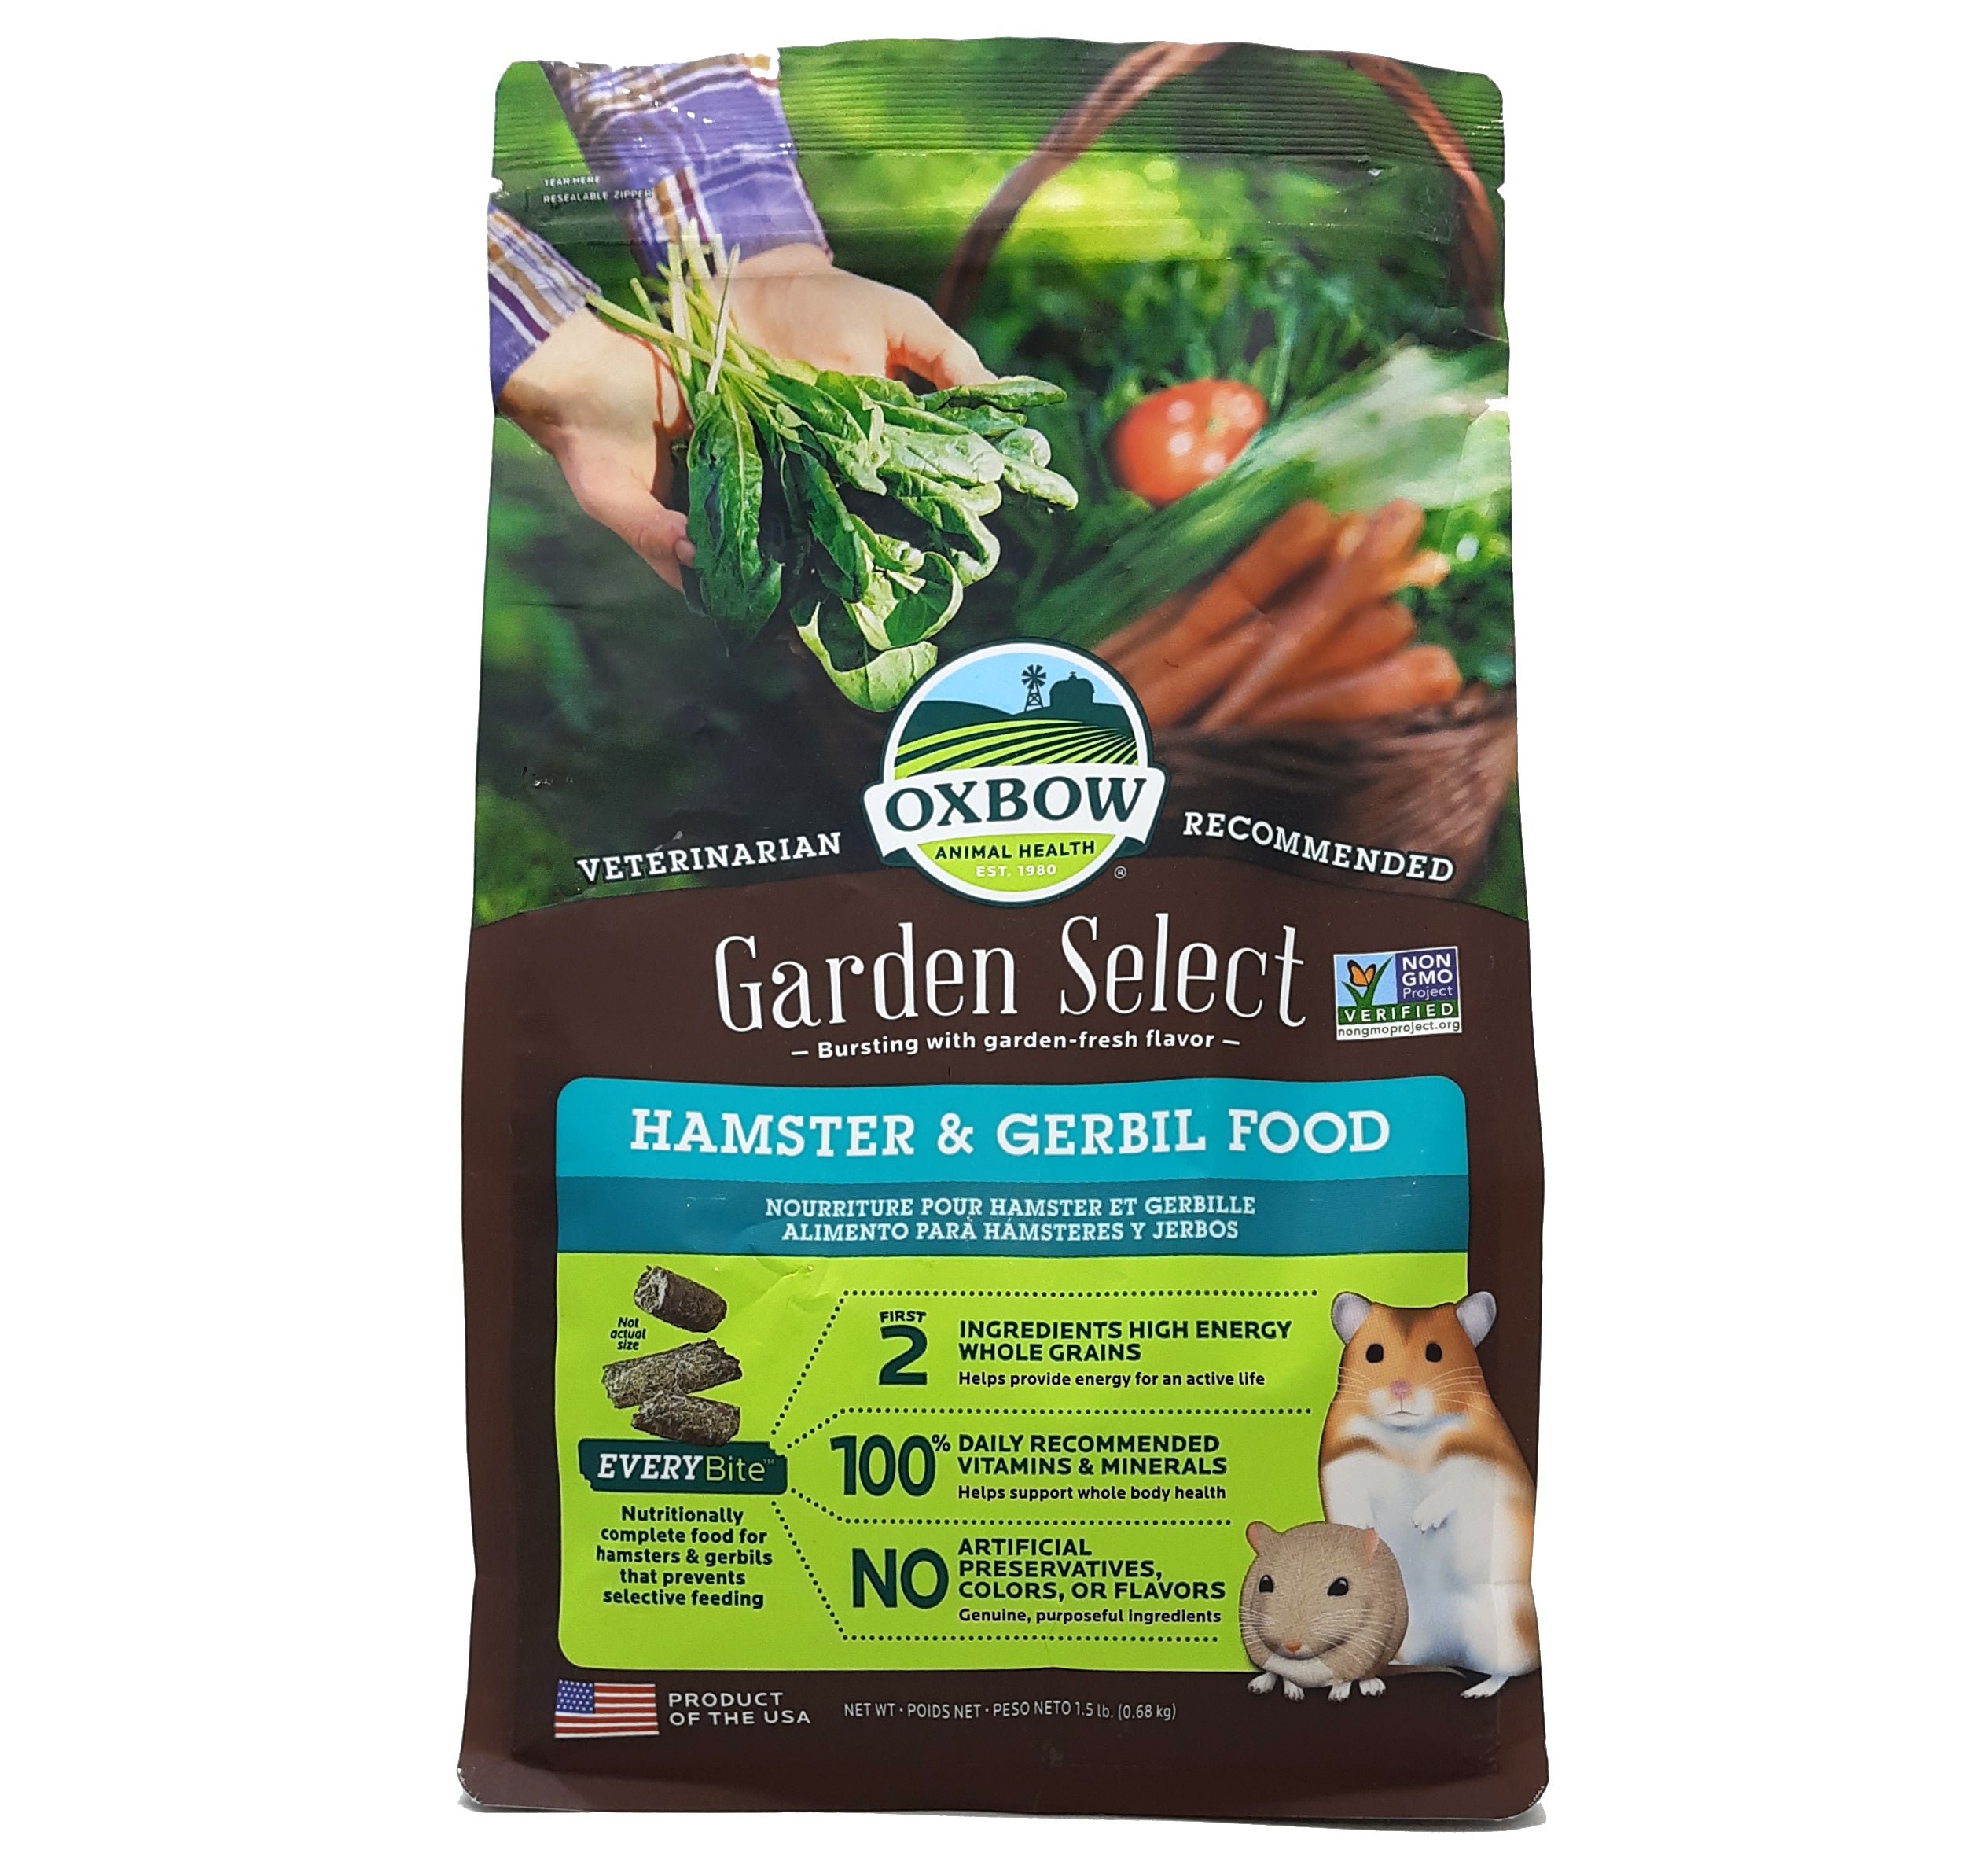 Food for Hamster and Gerbil Garden Select Oxbow 680 grs